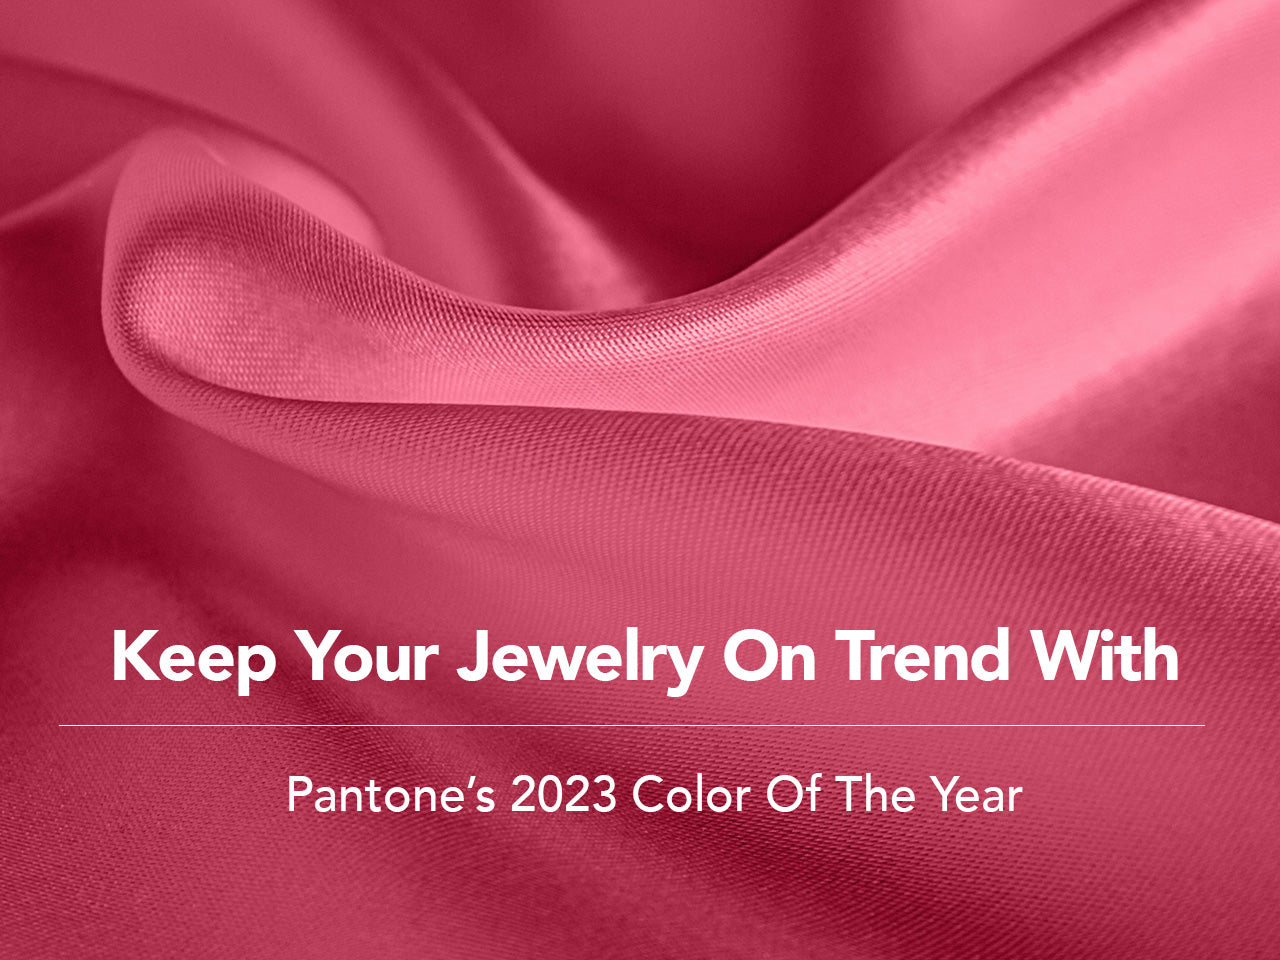 How to use Viva Magenta - Pantone Color of the Year 2023 in your